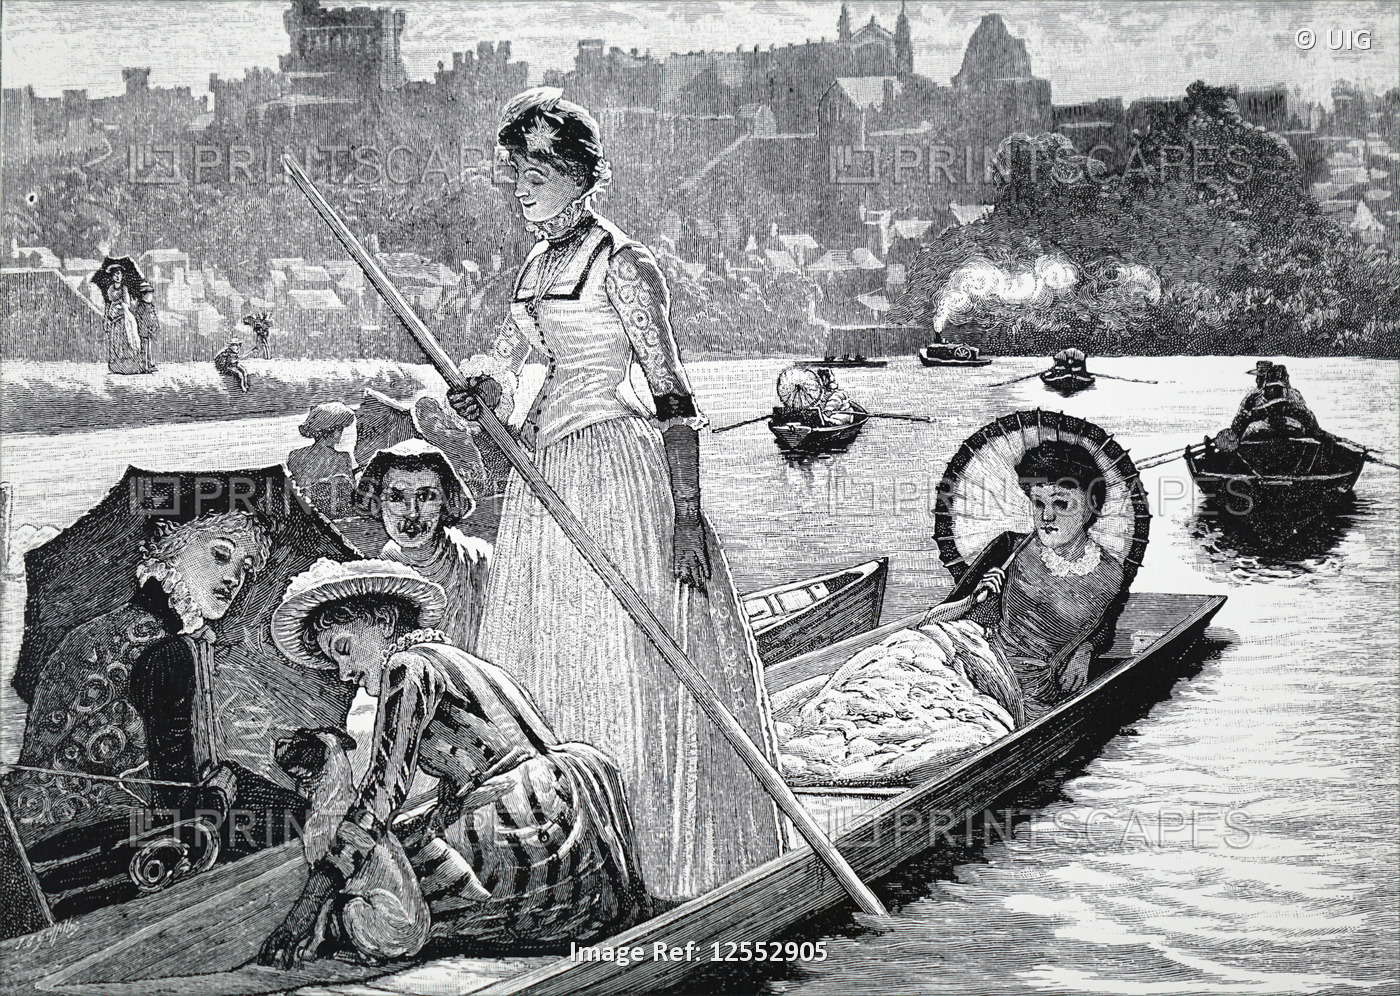 Illustration depicting young women spending a summer afternoon on a boat, 19th century